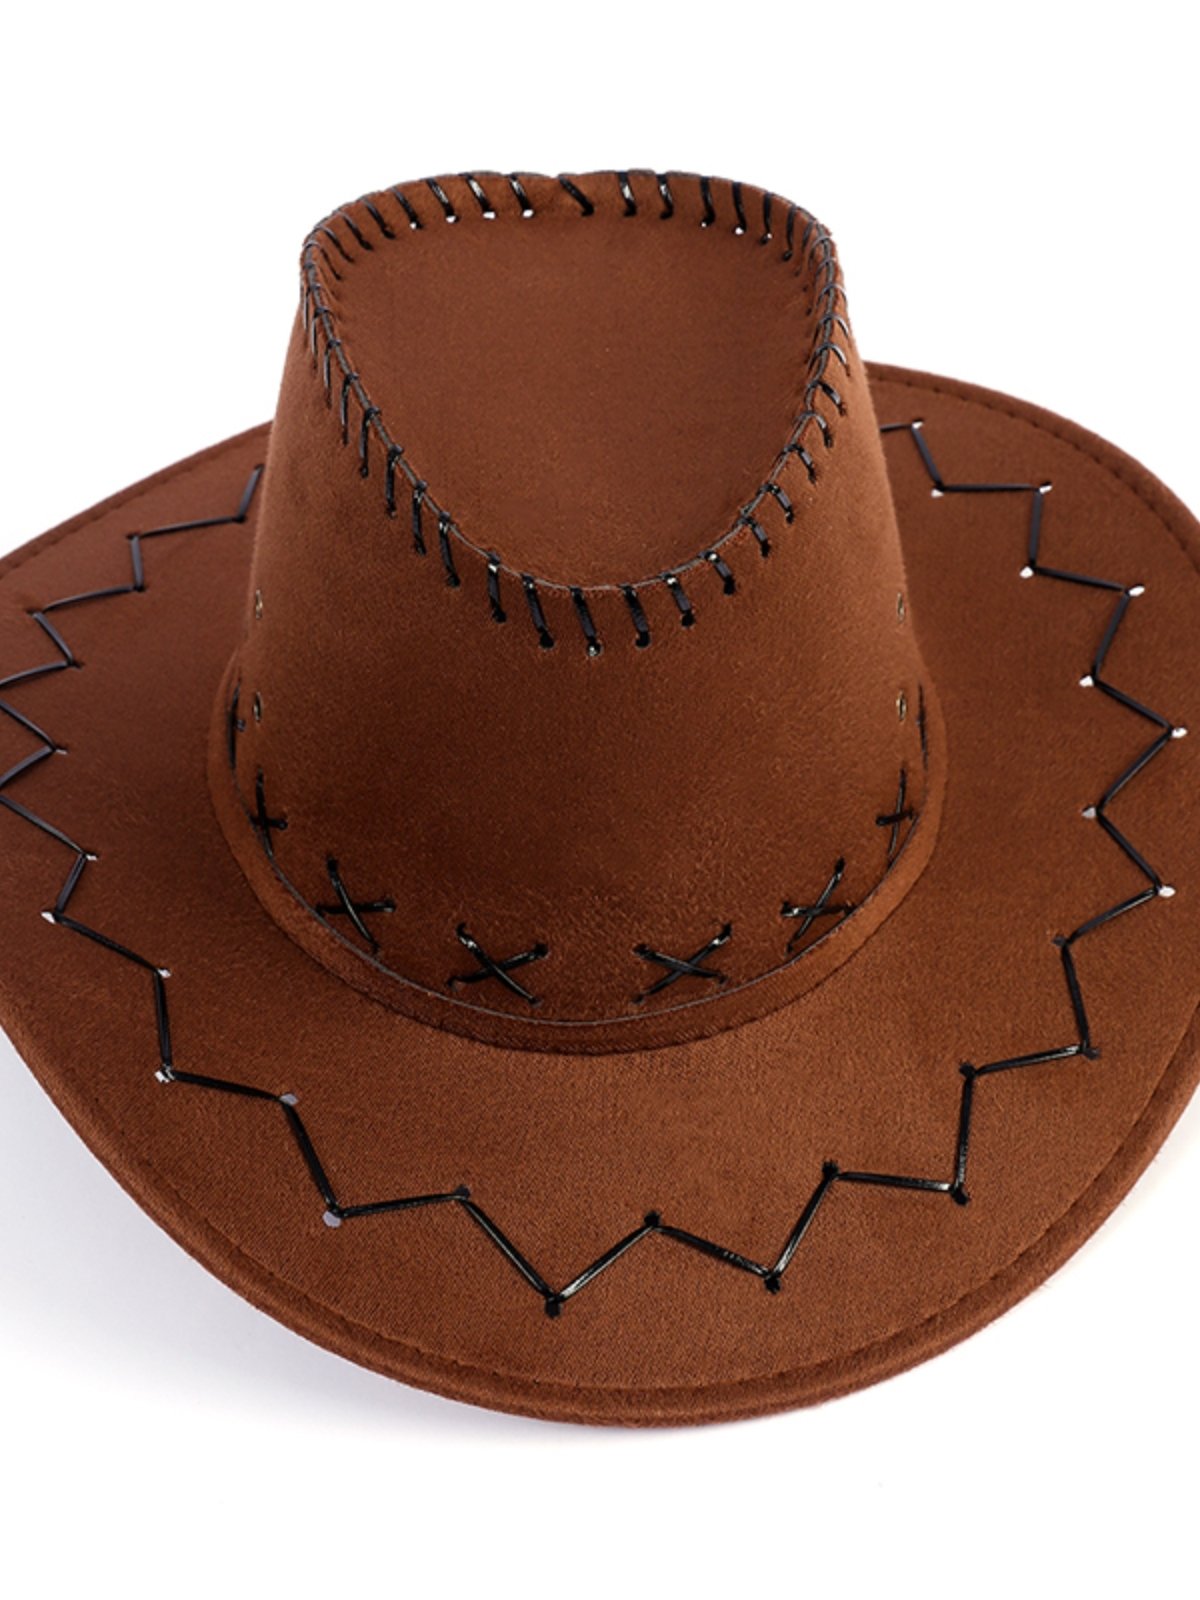 Hardaddy Vintage Leather Cowboy Hat Western Ethnic Music Festival Party Accessories